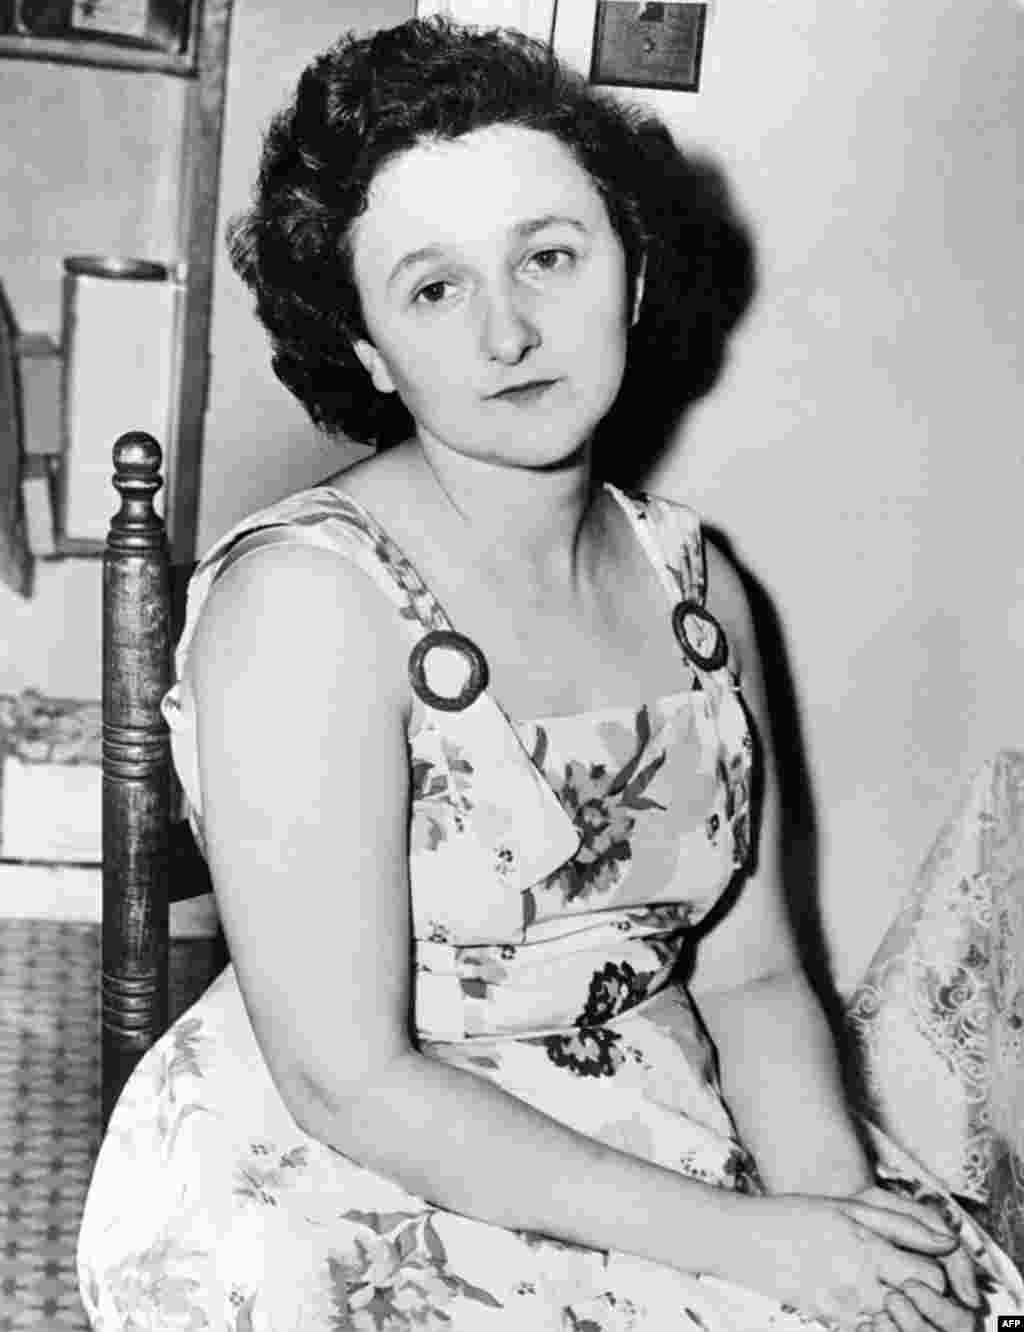 Later evidence emerged that Julius Rosenberg had in fact acted as a courier and recruiter for Soviet intelligence. But the involvement of Ethel Rosenberg, seen here in an undated photo, was more ambiguous, and may have involved little more than typing notes for Julius. 